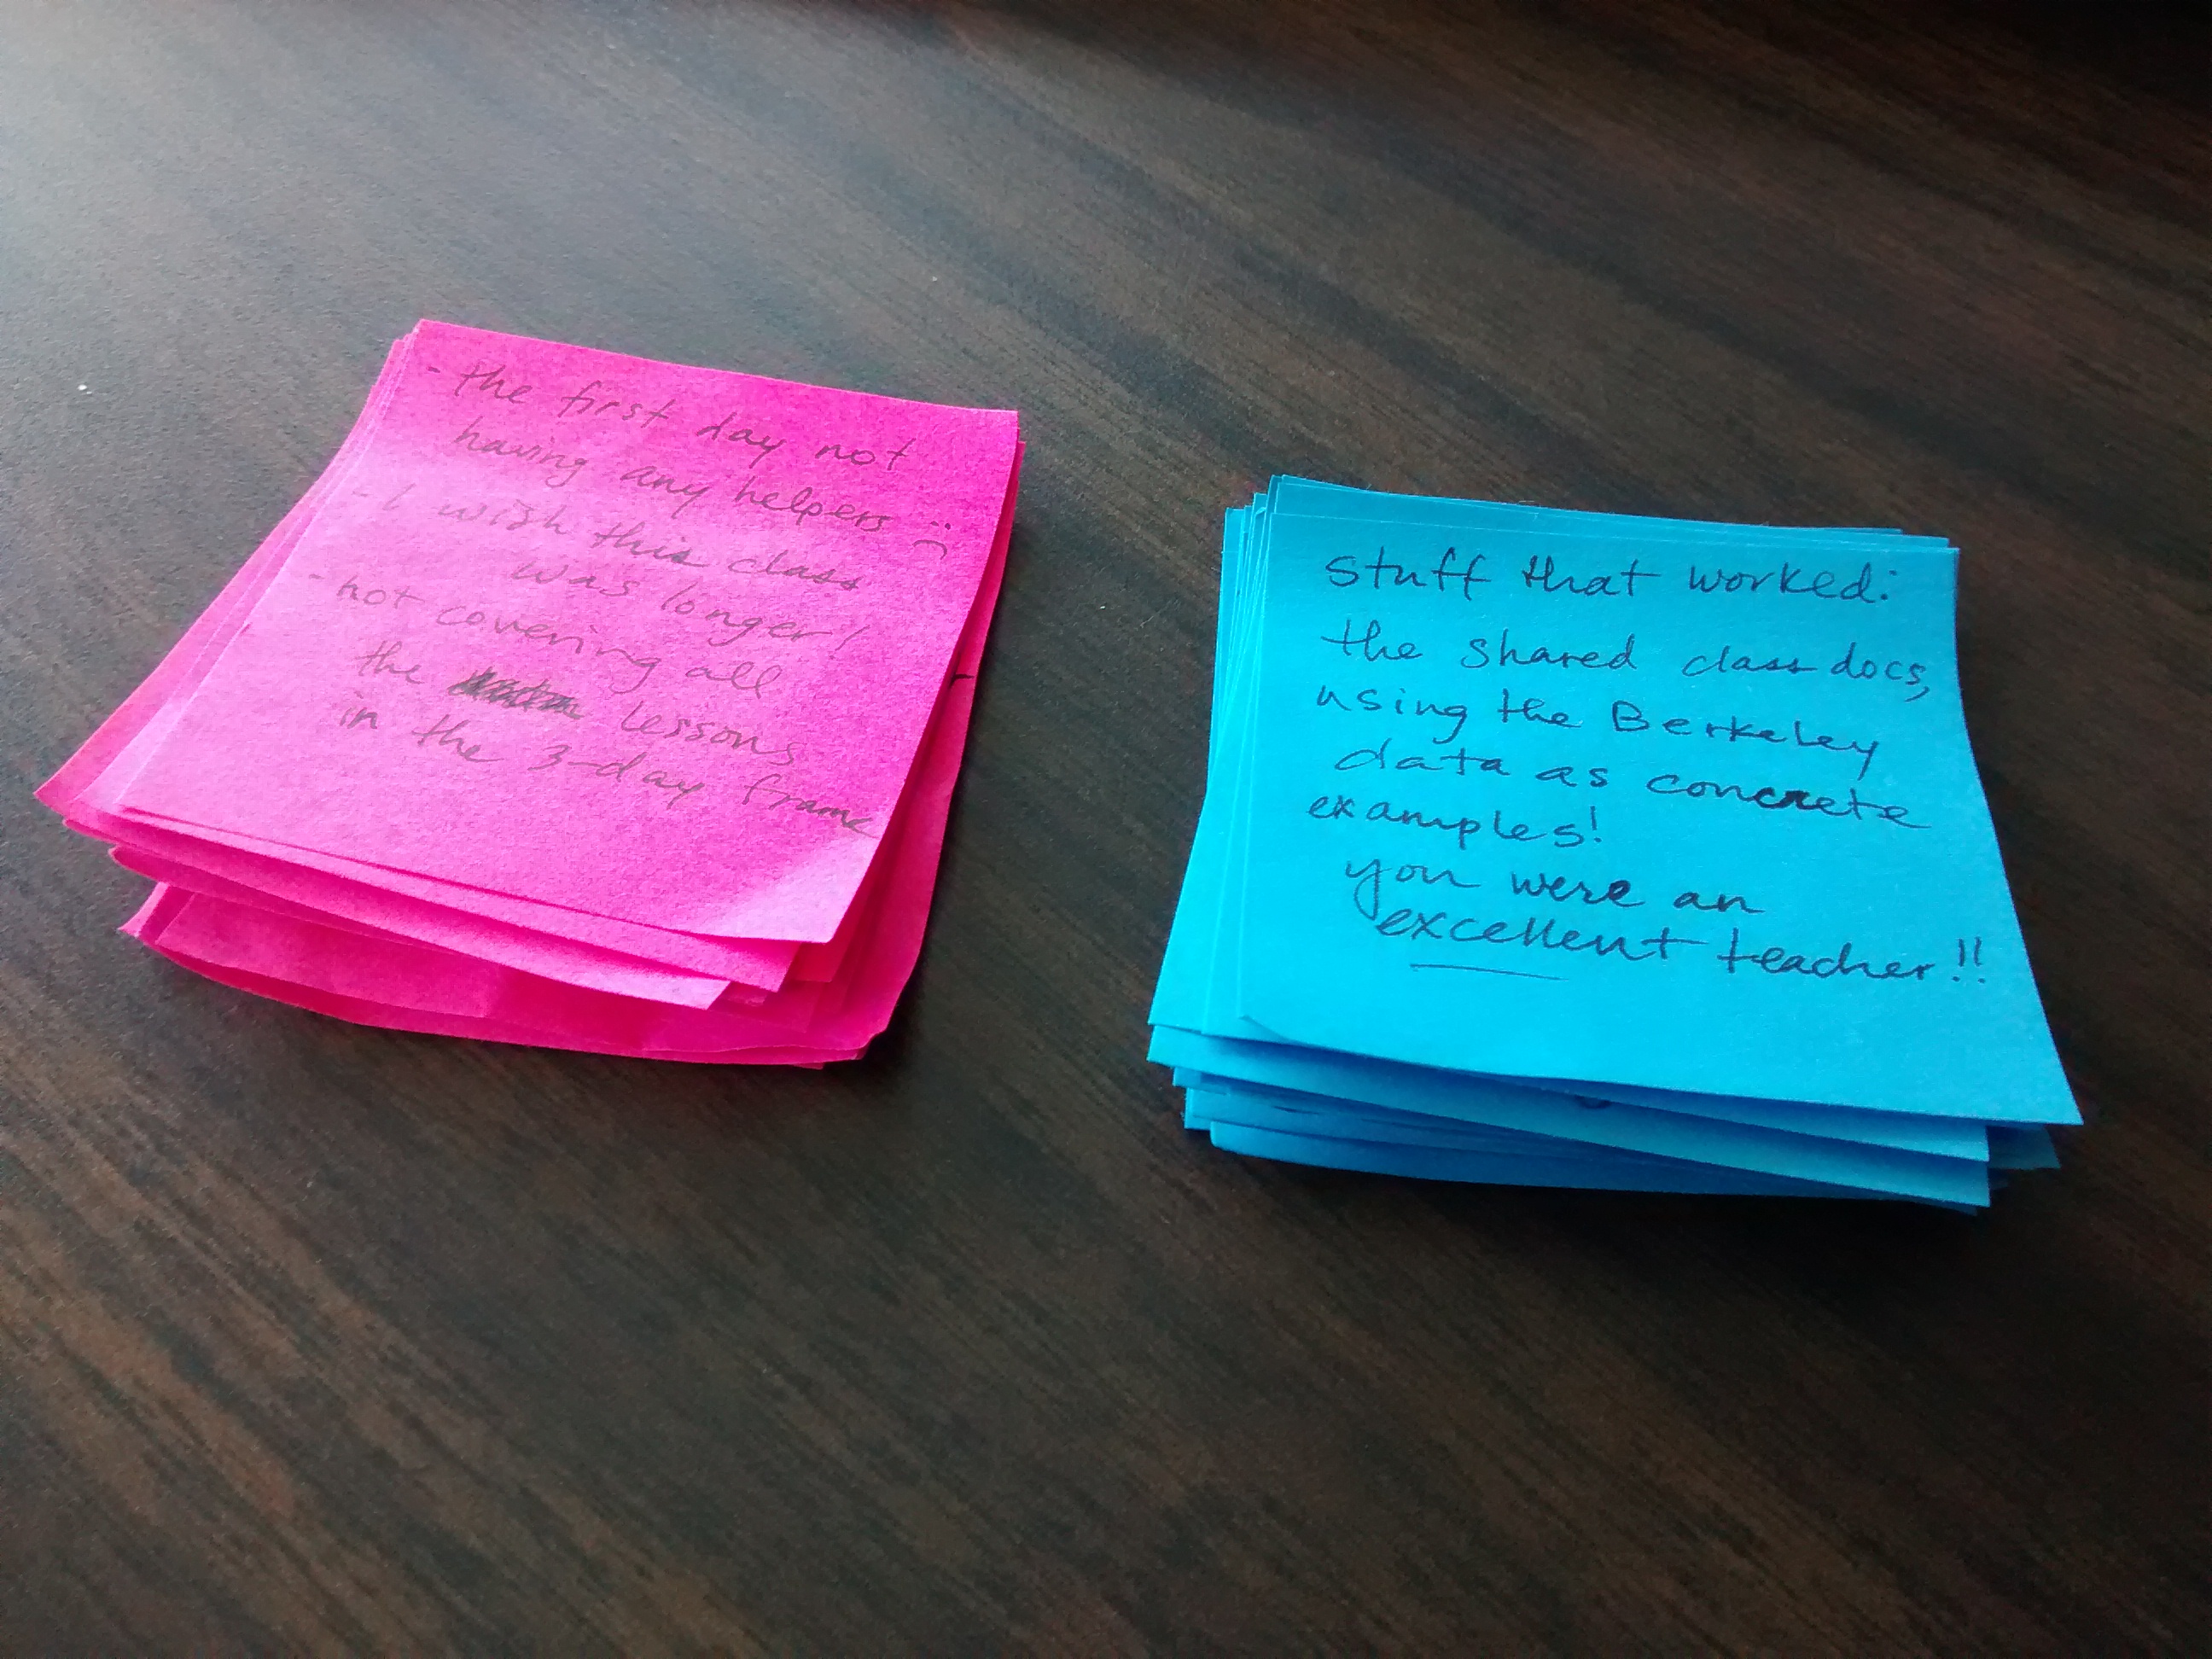 Feedback on the colored sticky notes.